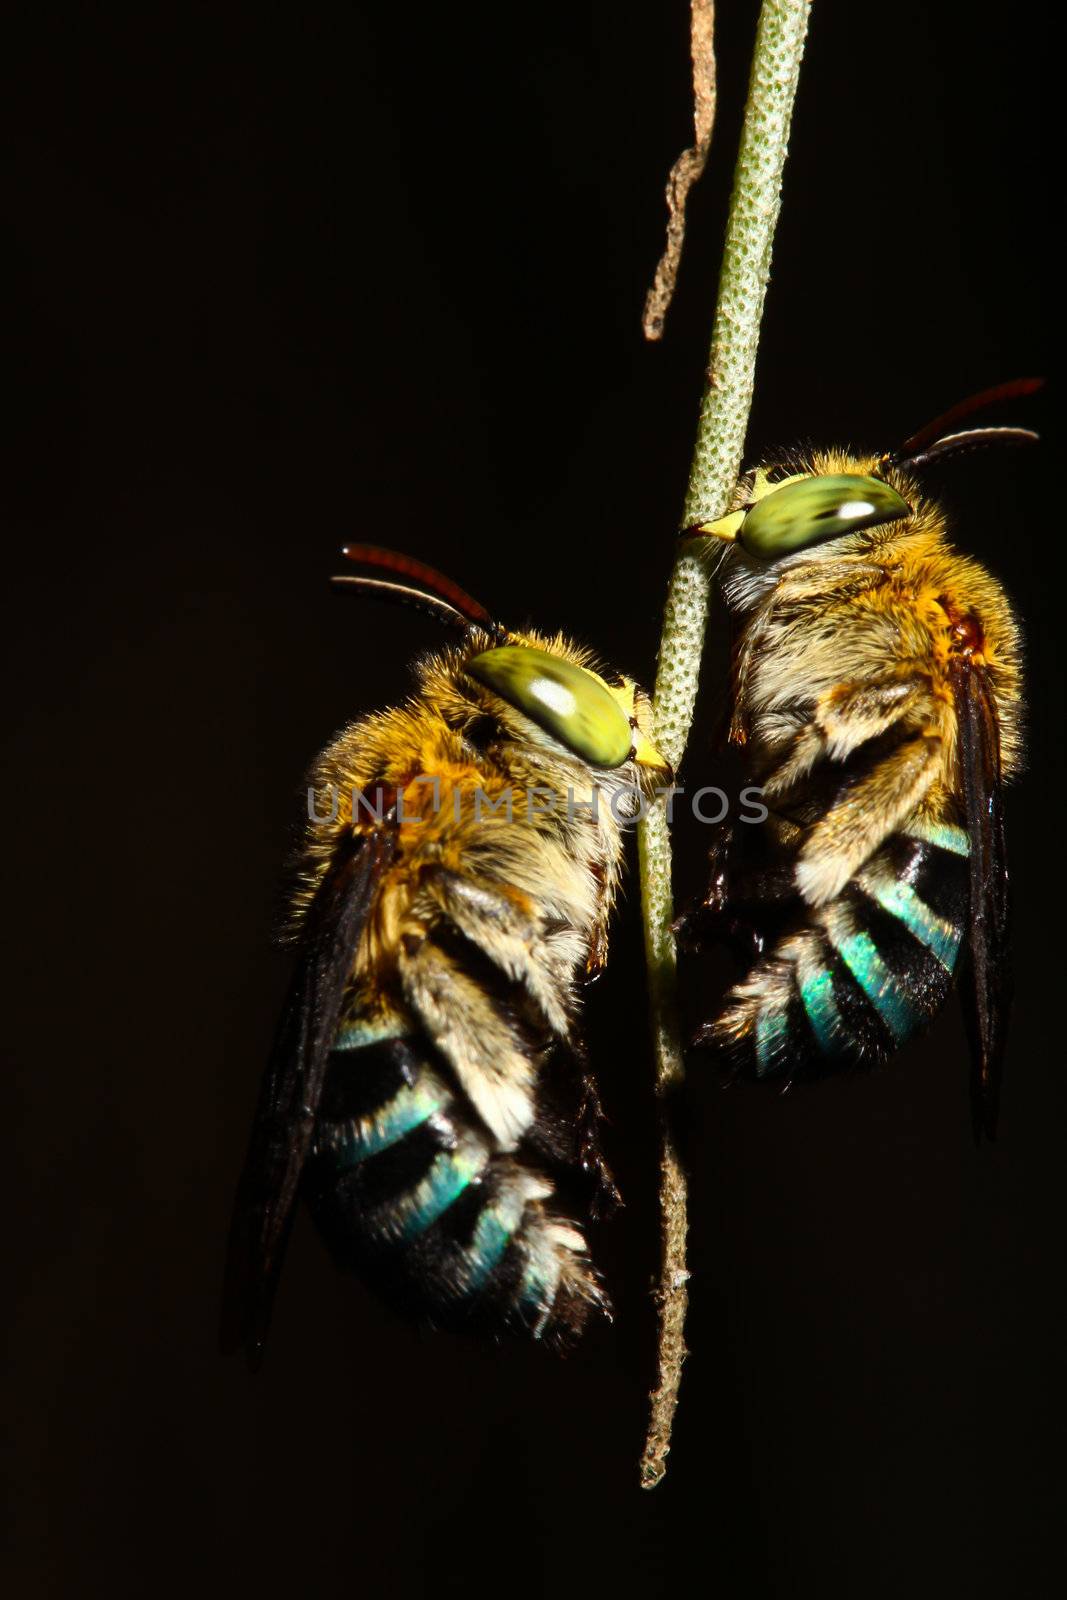 Bees on a branch. by bajita111122